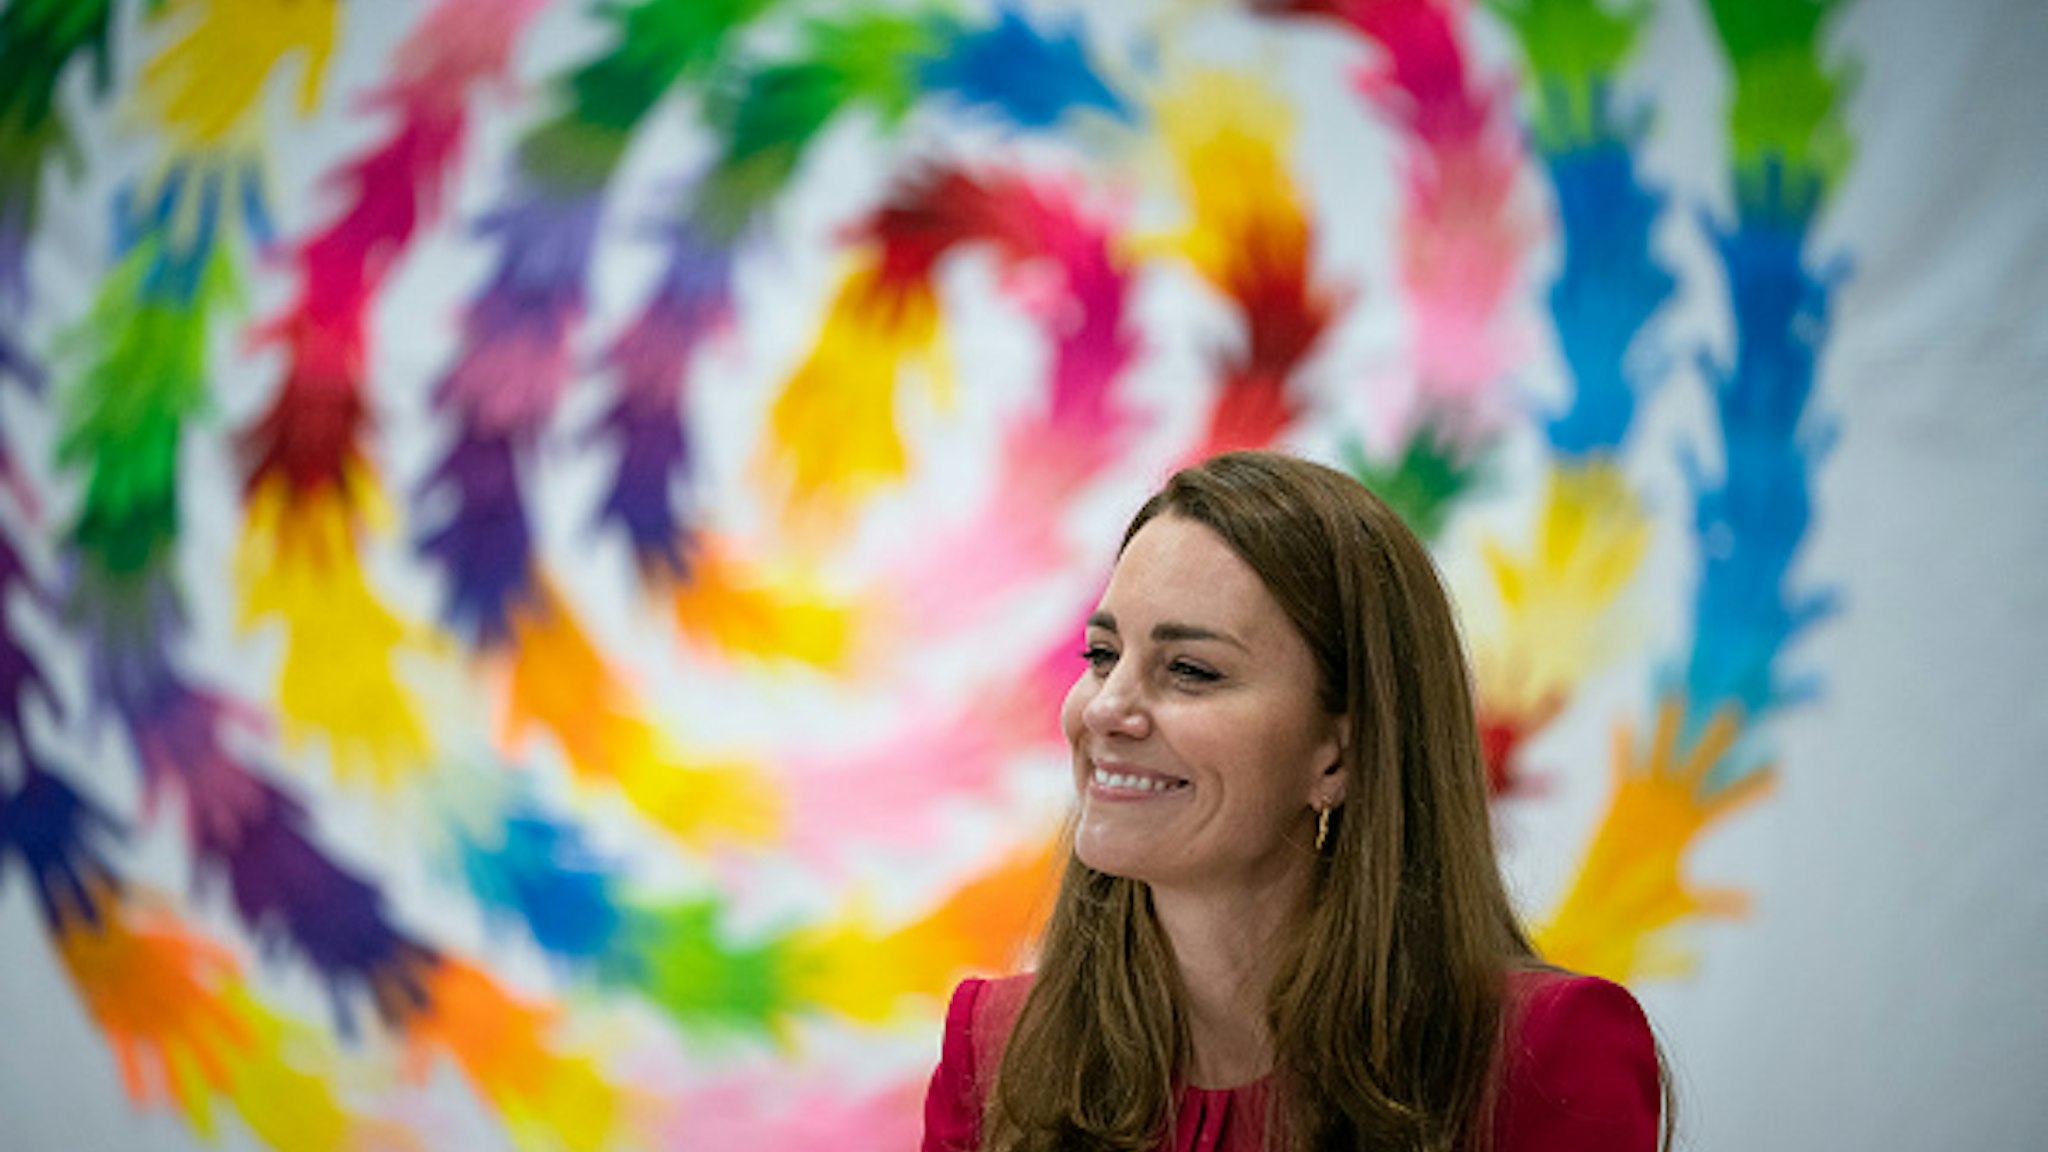 HAYLE, UNITED KINGDOM - JUNE 11: Catherine, Duchess of Cambridge participating in a roundtable discussion with a number of representatives from the early years sector who have been influential in the Duchess work in this space, during a visit to Connor Downs Academy, during the G7 summit in Cornwall on June 11, 2021 in Hayle, west Cornwall, England.